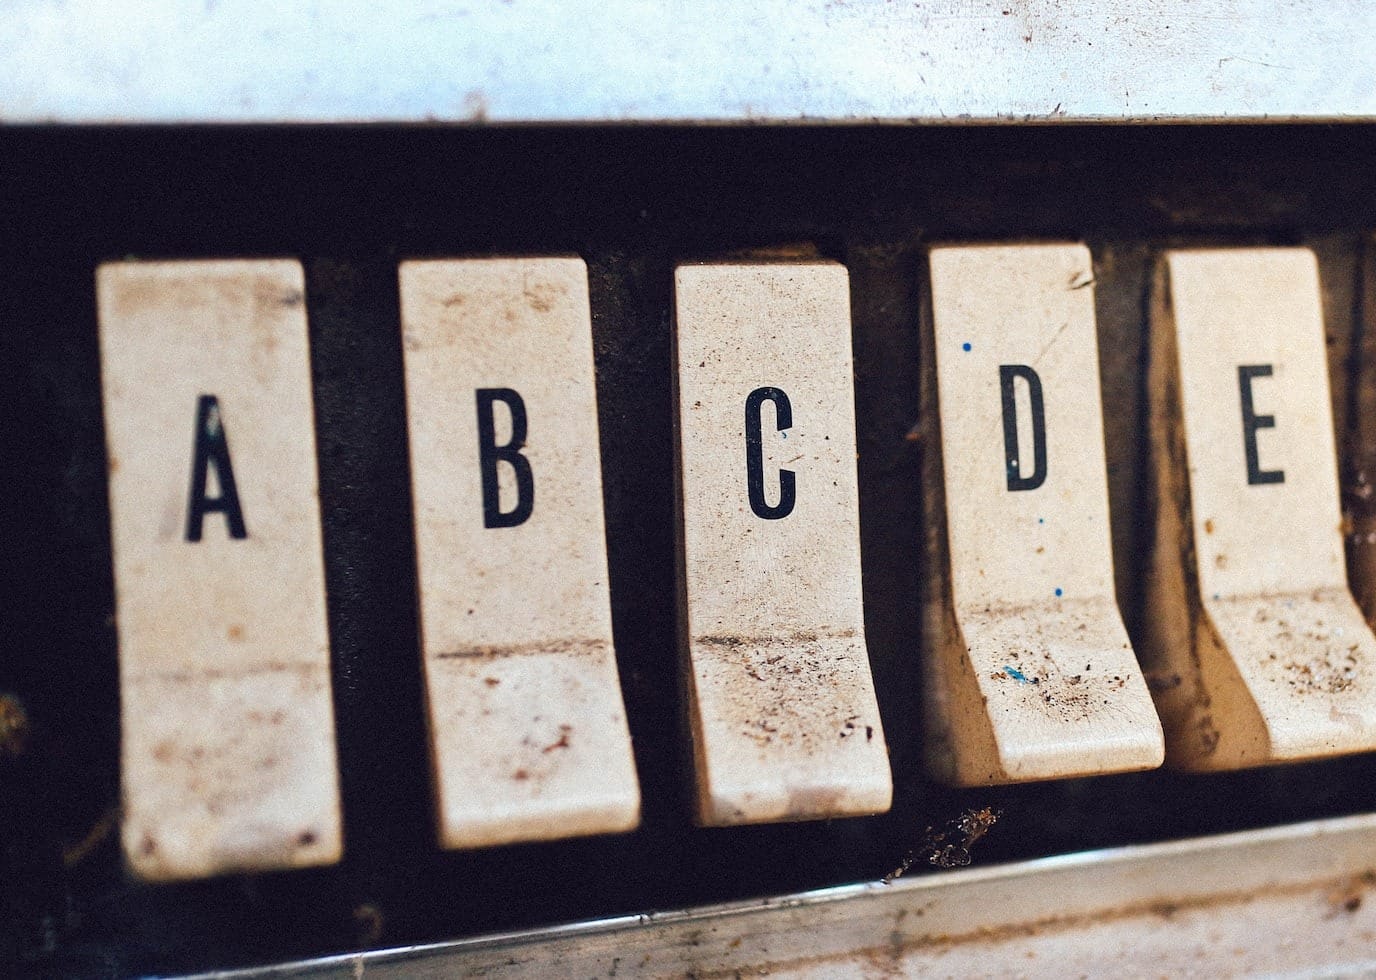 Have you learnt your ABC’s?